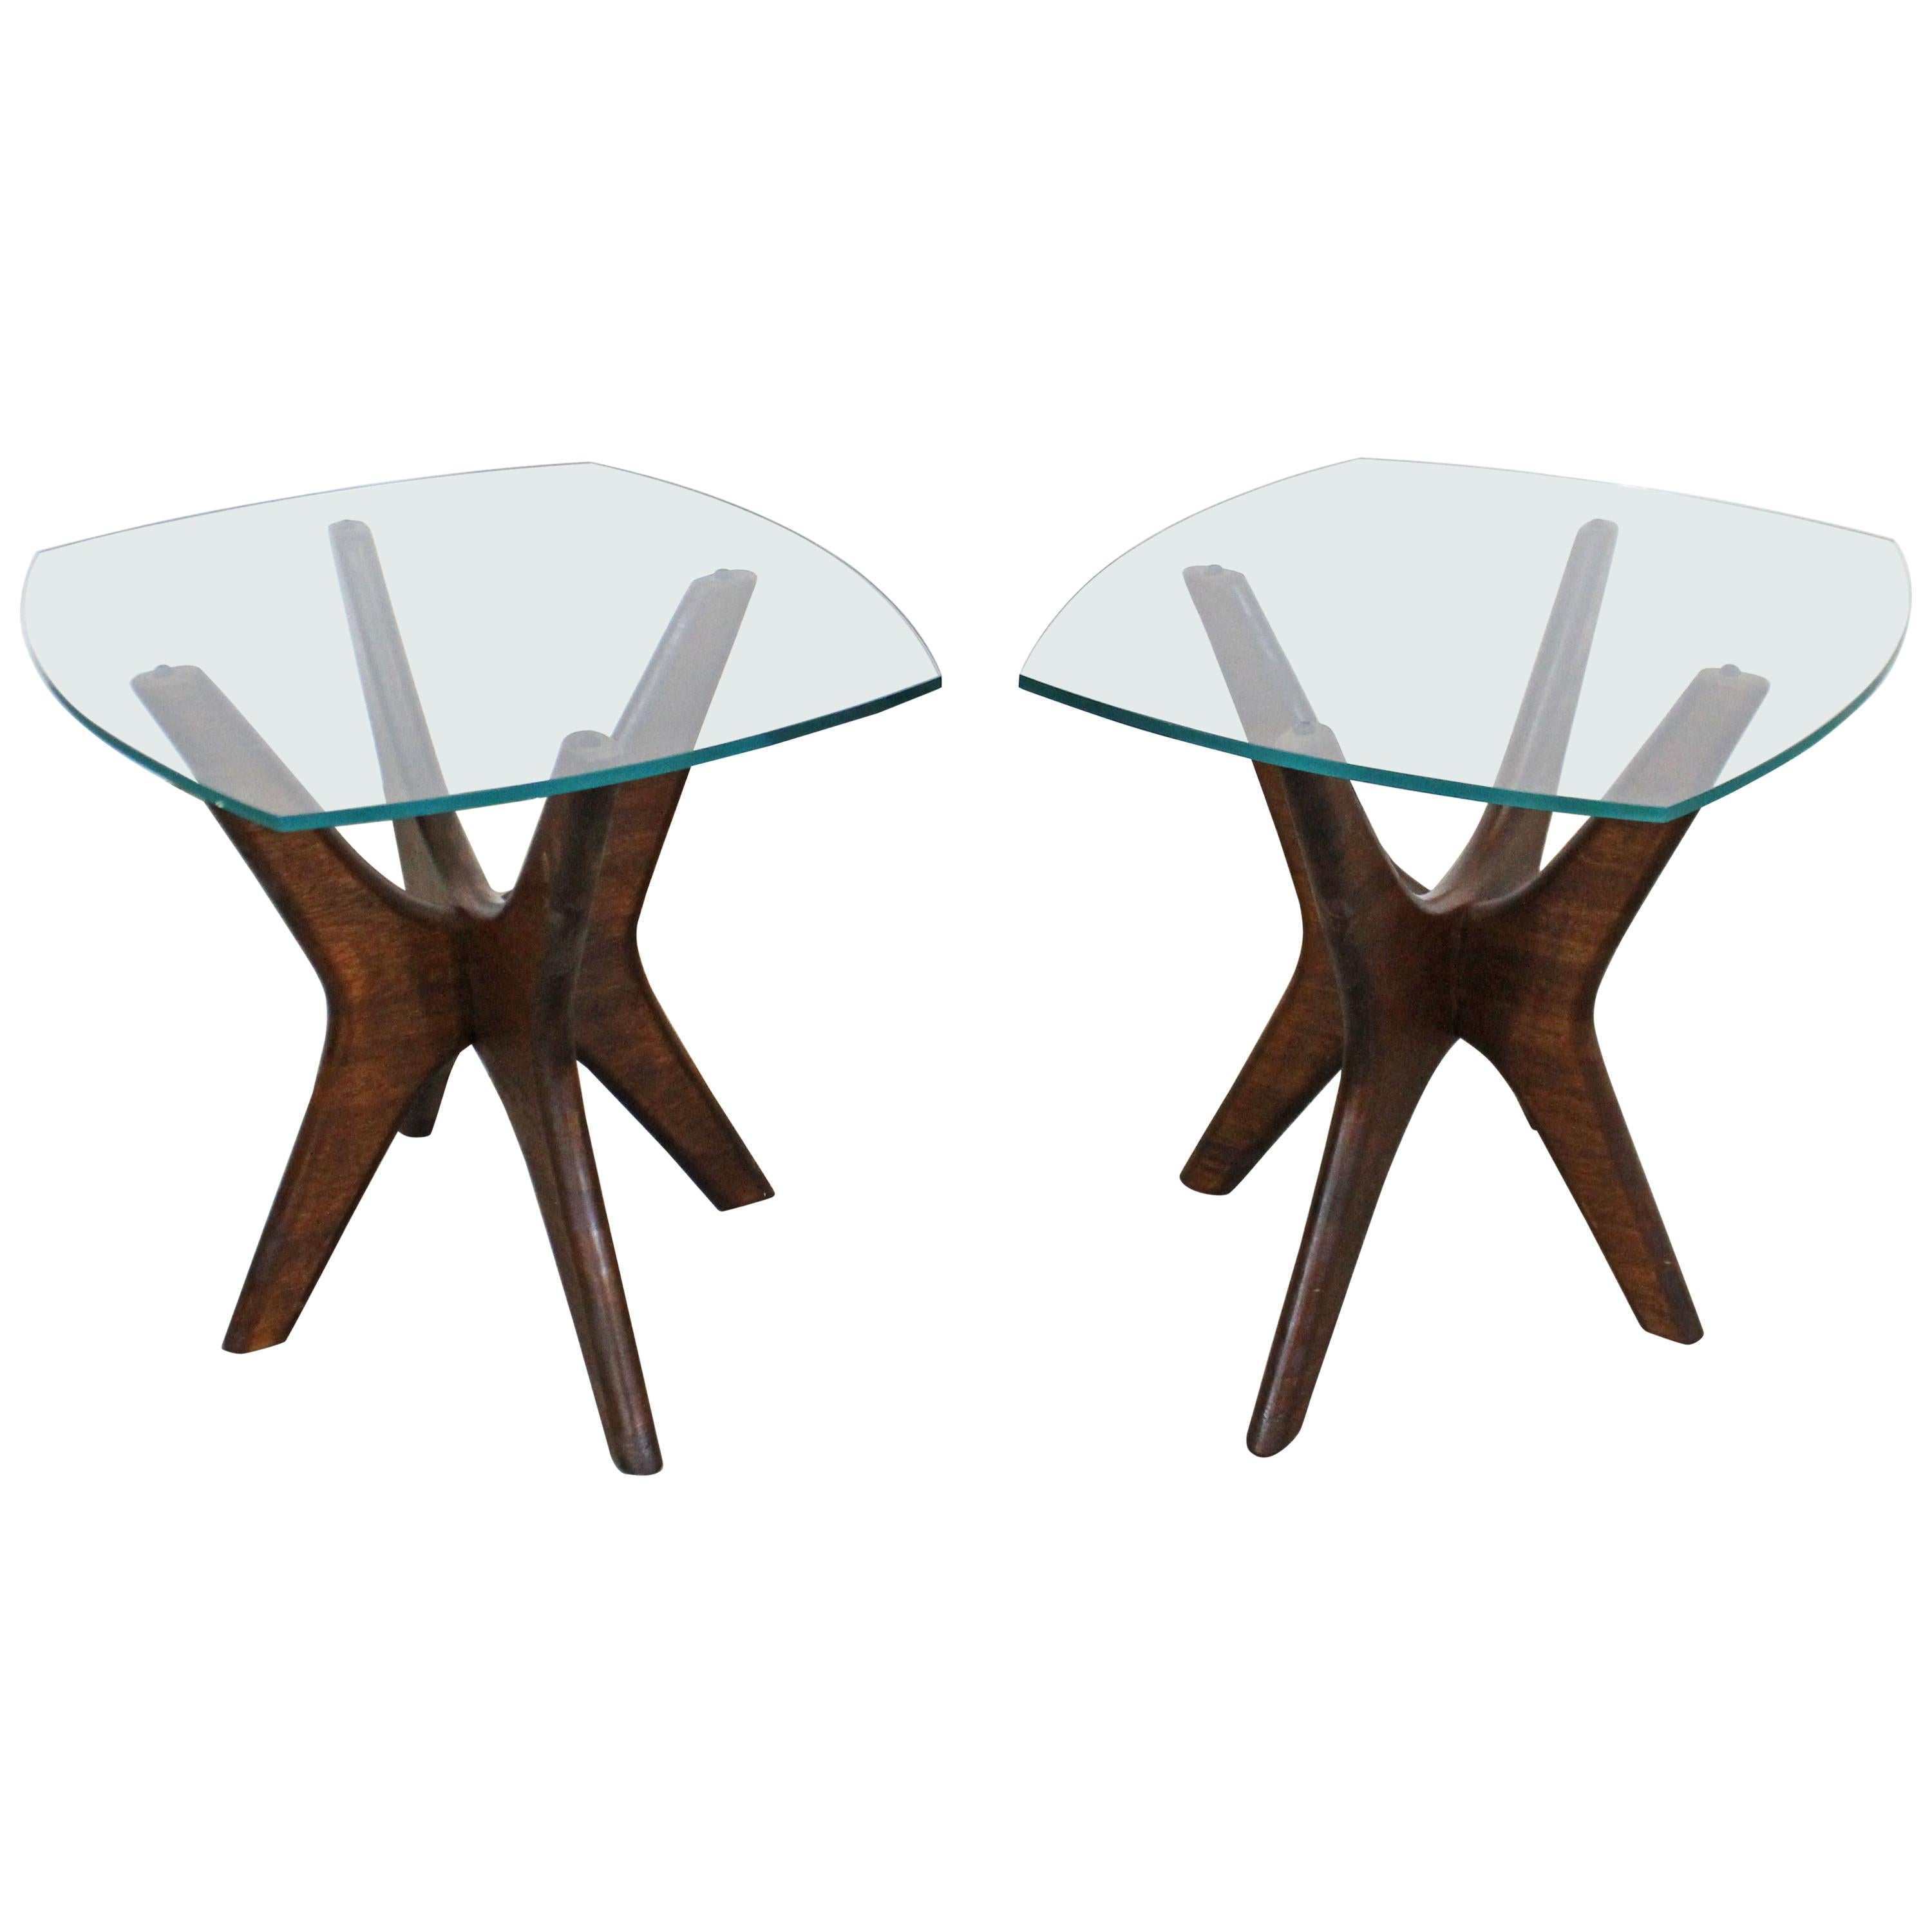 Pair of Mid-Century Modern Adrian Pearsall 'Jacks' Glass Top End Tables